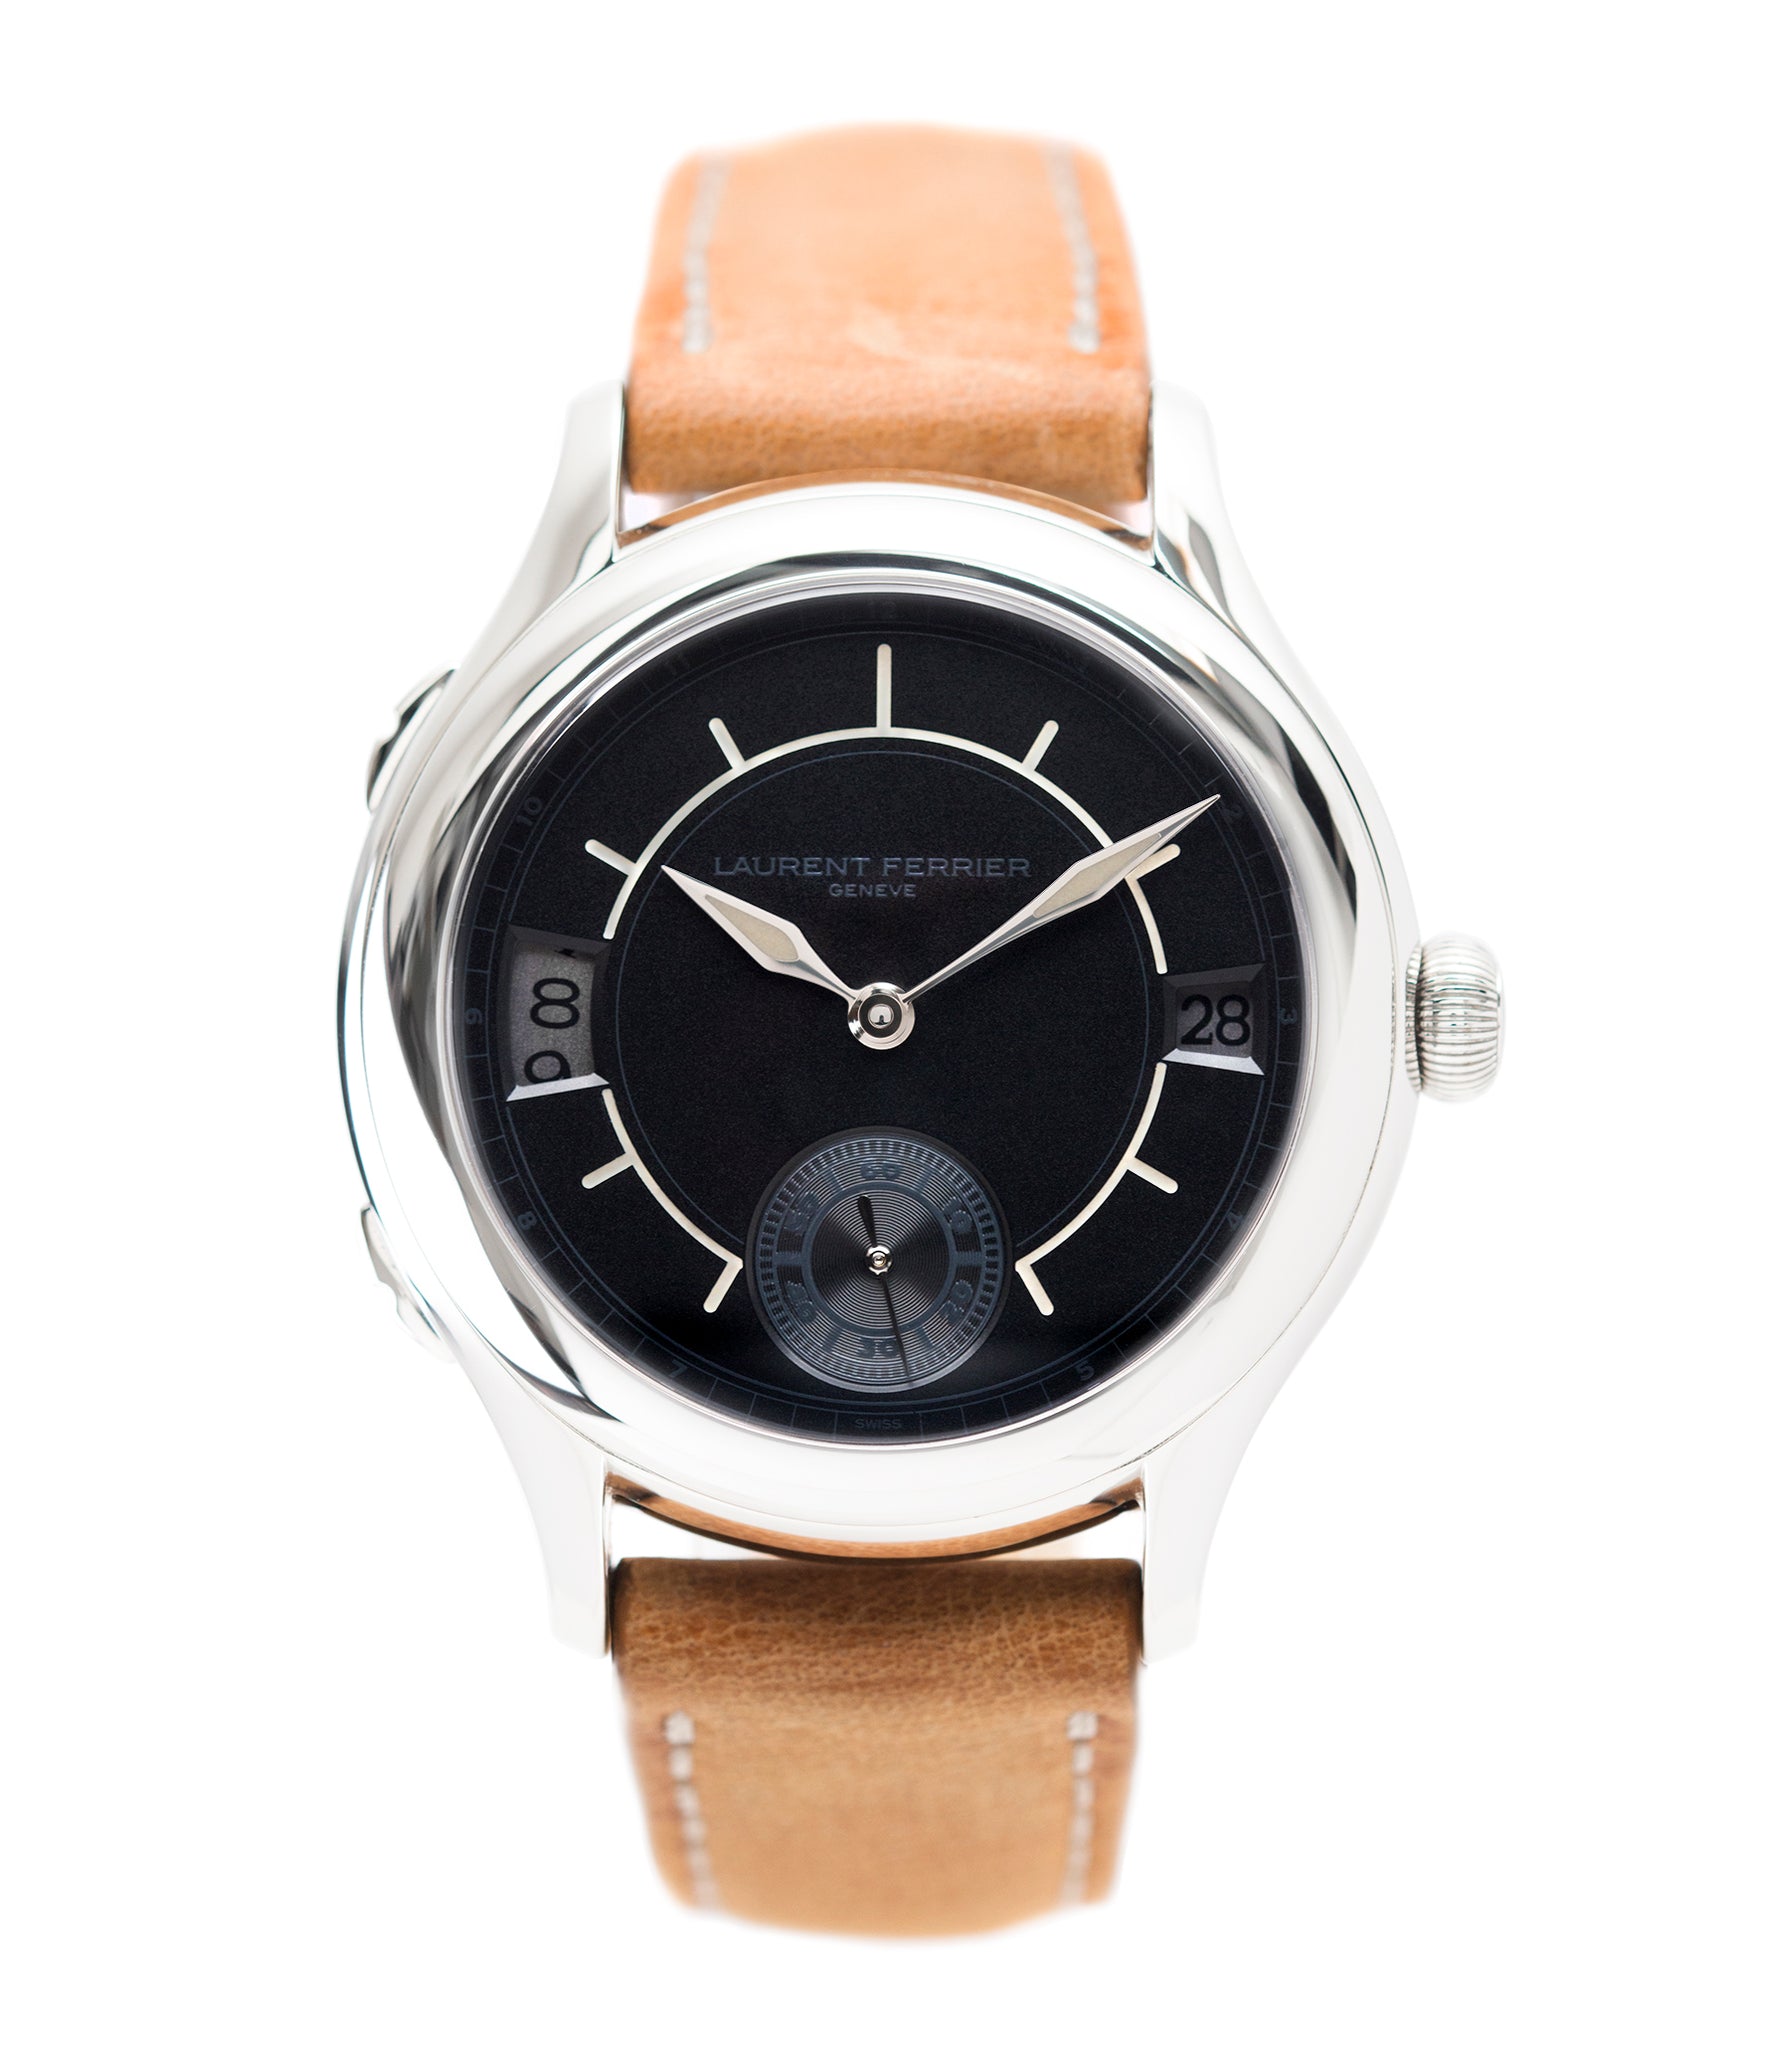 buy Laurent Ferrier Galet Traveller Boreal steel dual-timezone black dial dress watch for sale online at A Collected Man London approved seller of pre-owned Laurent Ferrier independent watchmakers